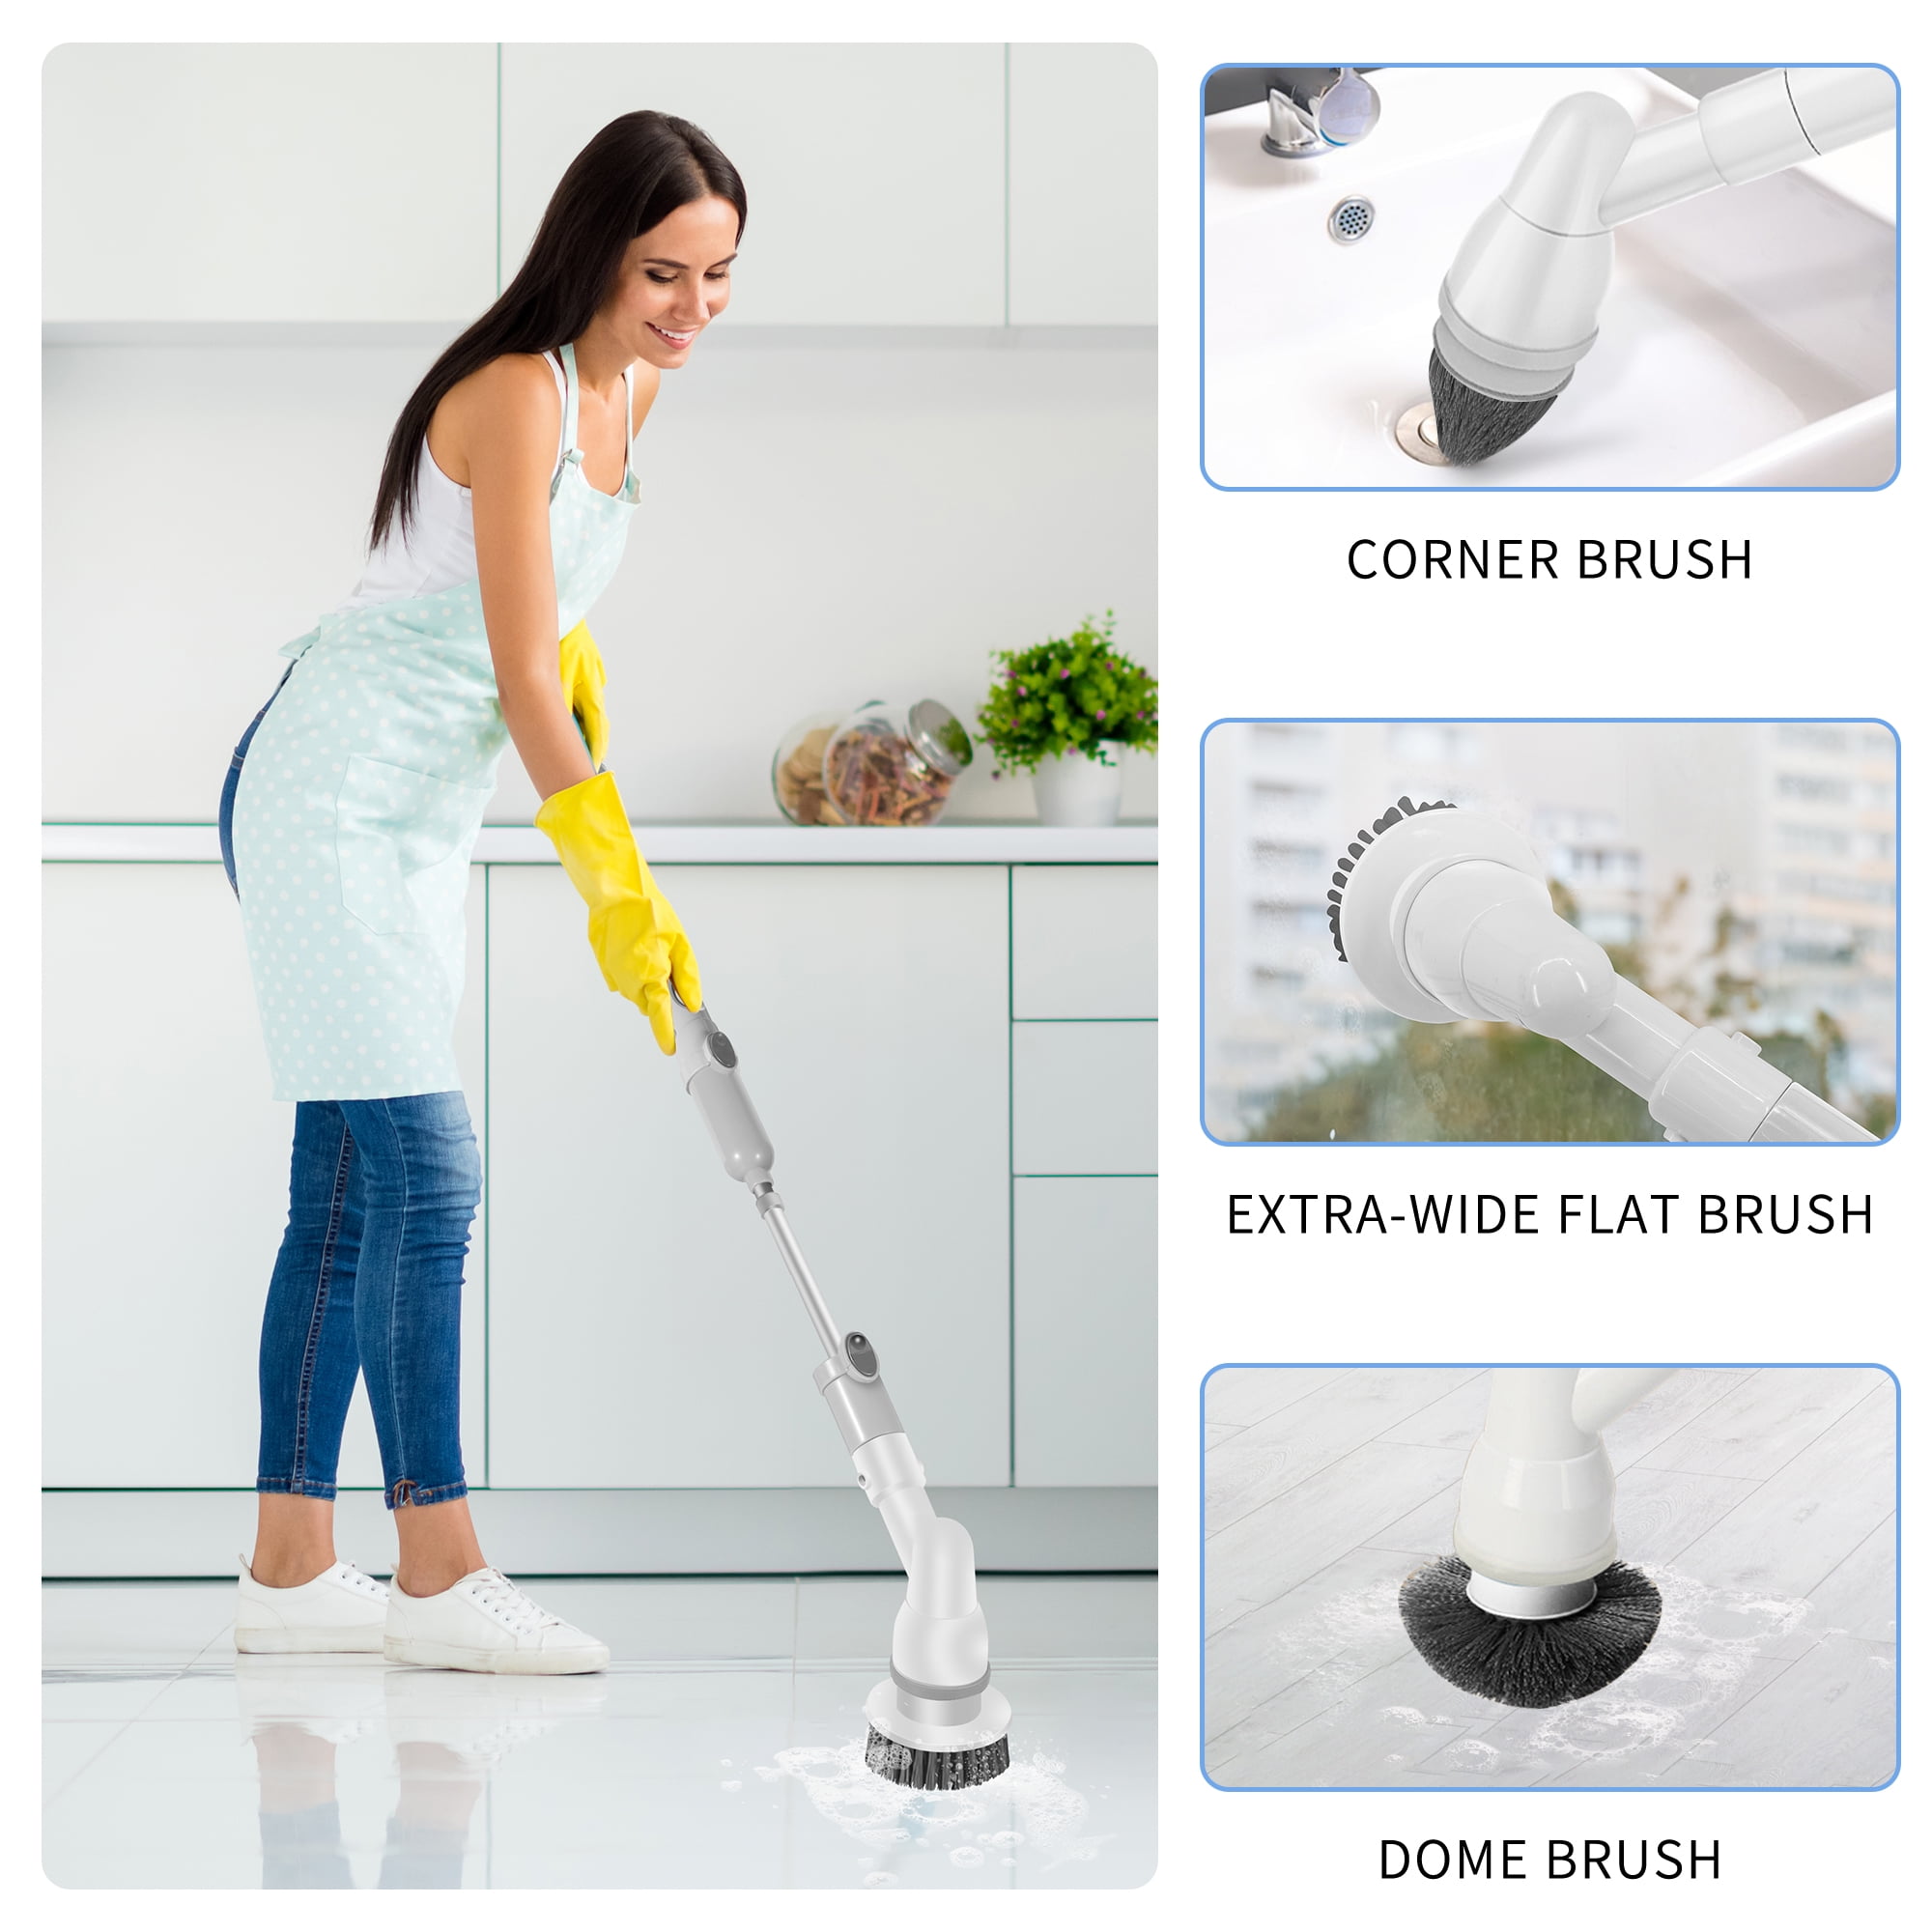 LovoIn Electric Spin Scrubber Cordless Rechargeable Multi-Purpose